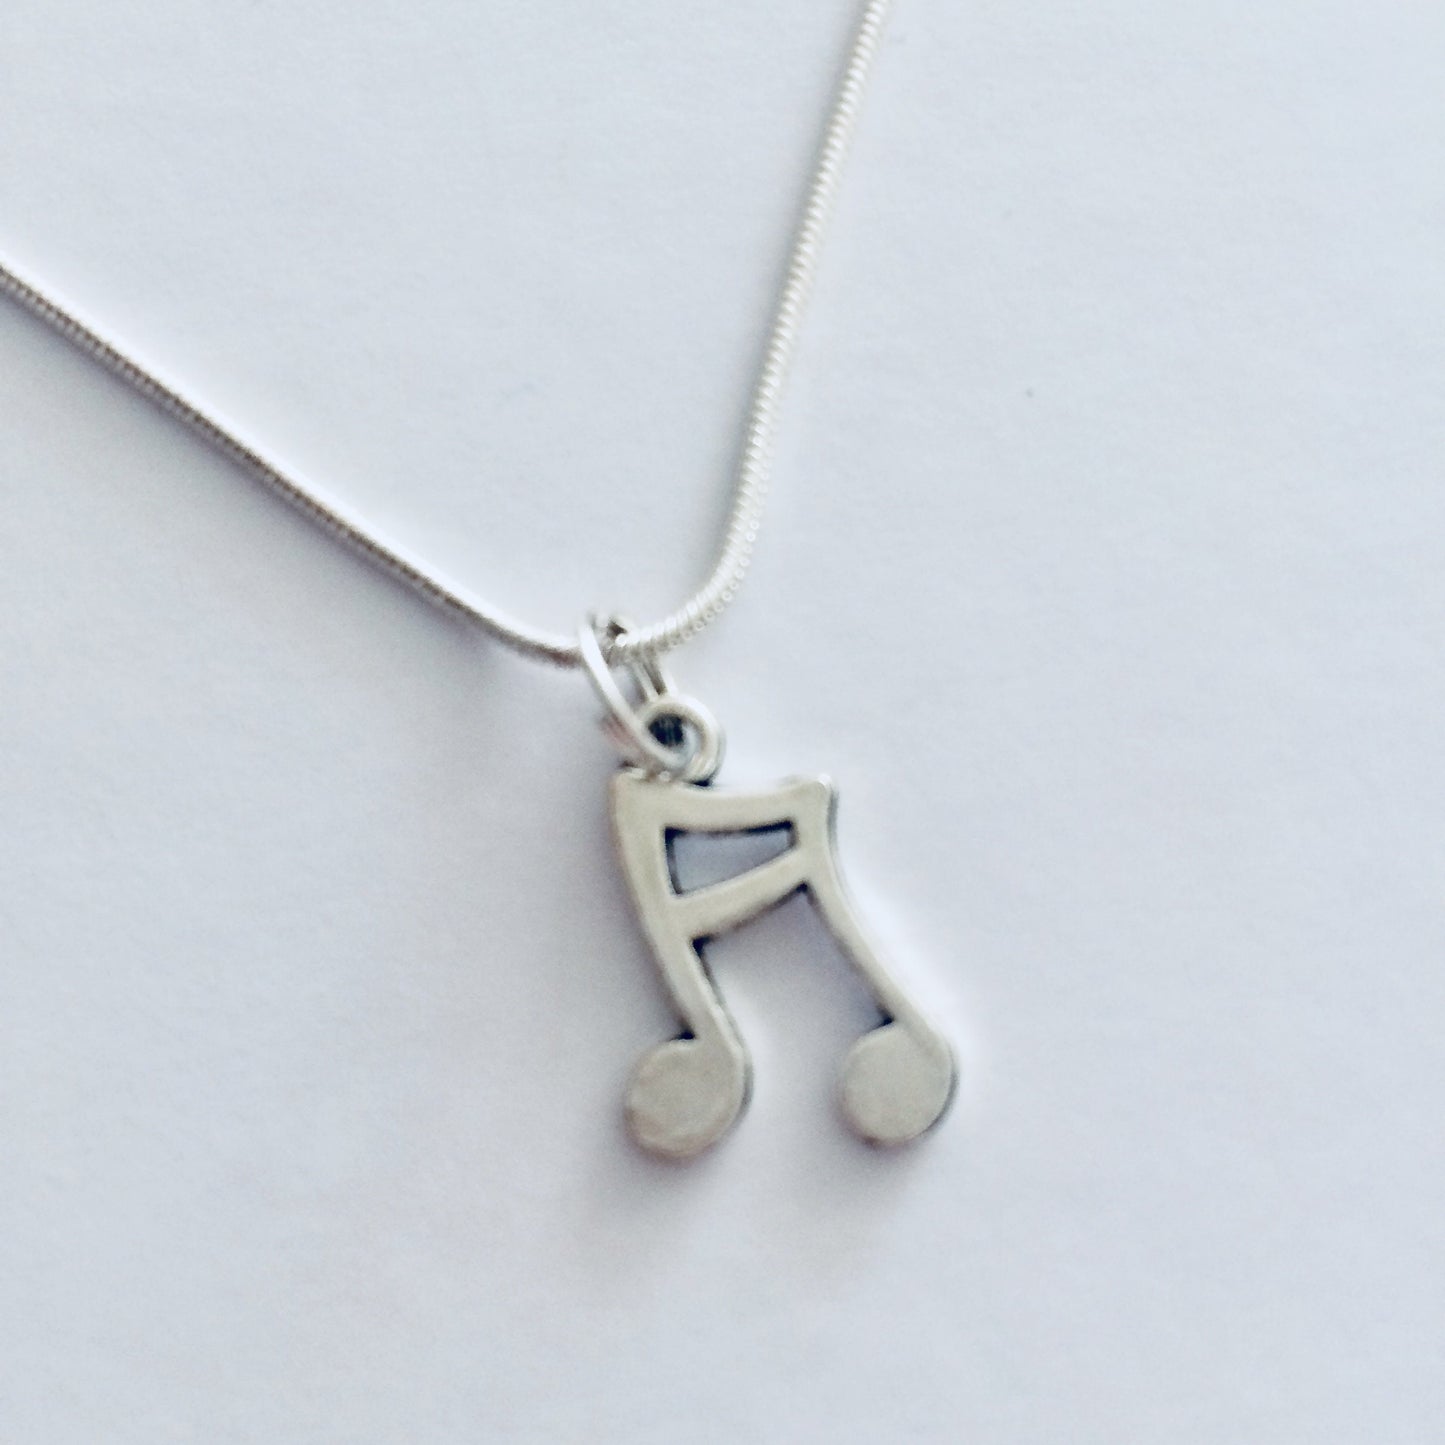 Music Note Necklace, Music Jewelry, Music Lover Gifts, Music Jewellery, Musician Gift Idea, Conductor Gift, Steel Band, Songsheet Gifts.